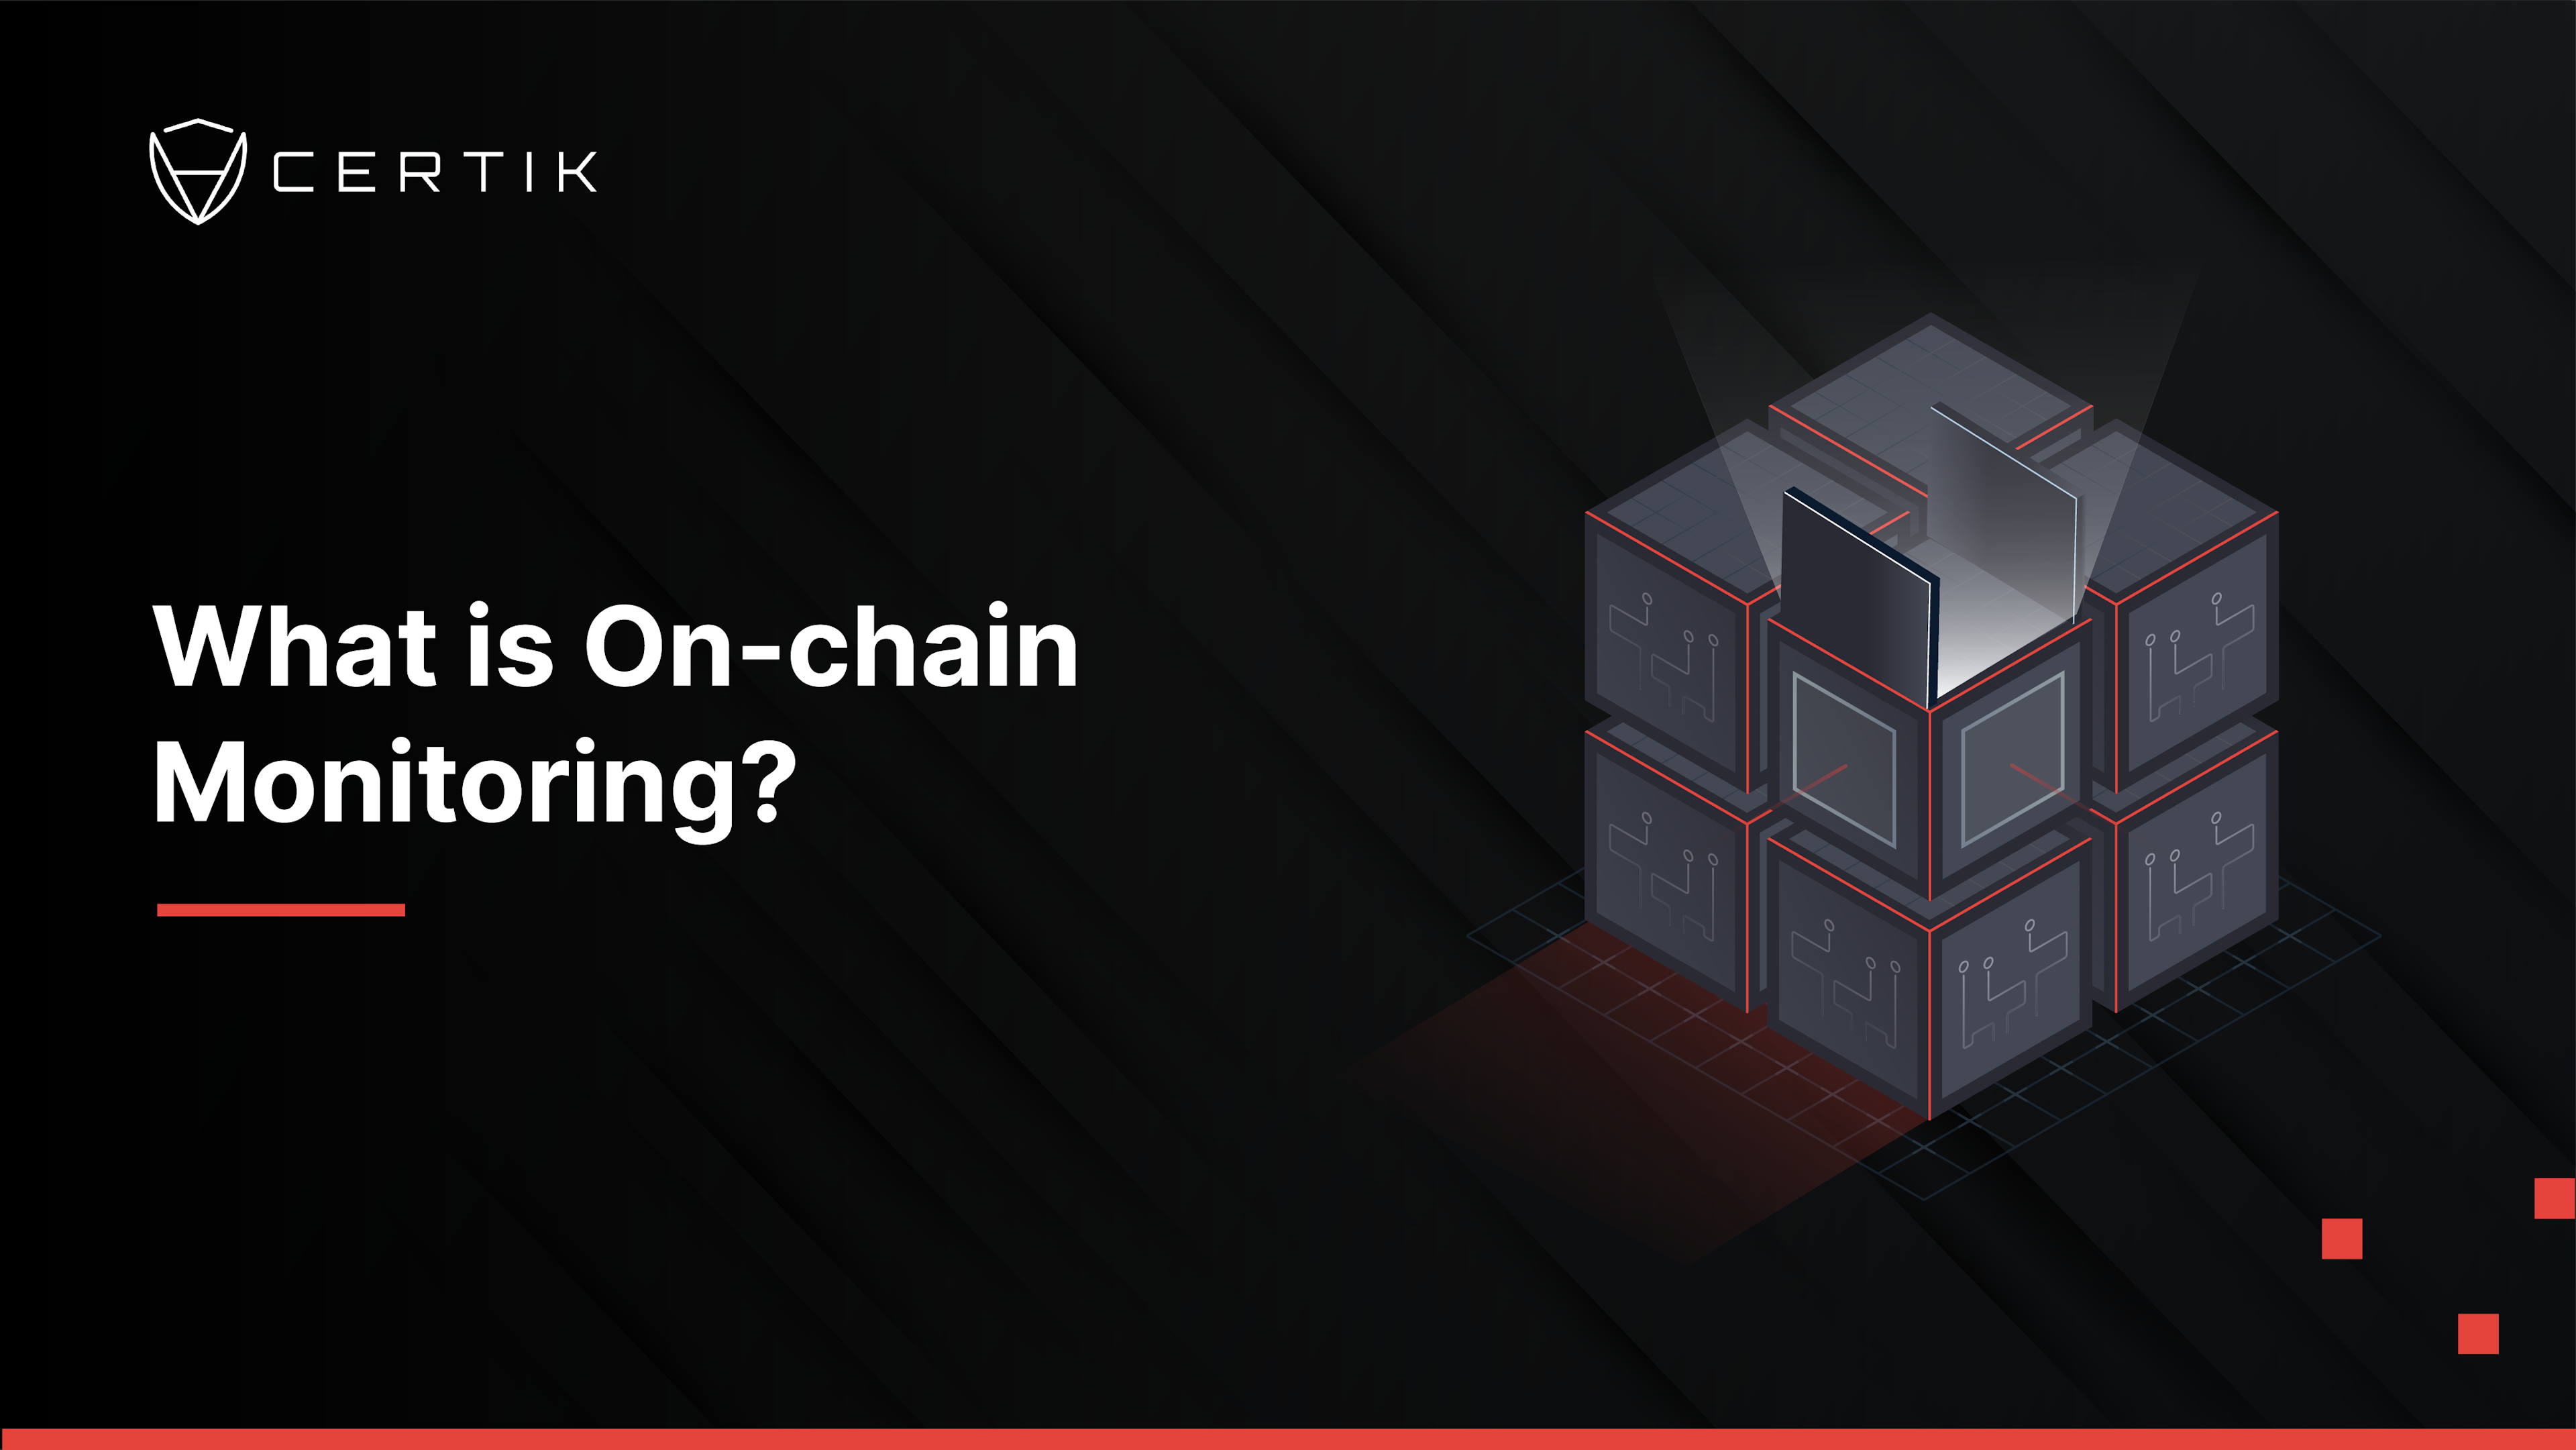 What is On-Chain Monitoring?